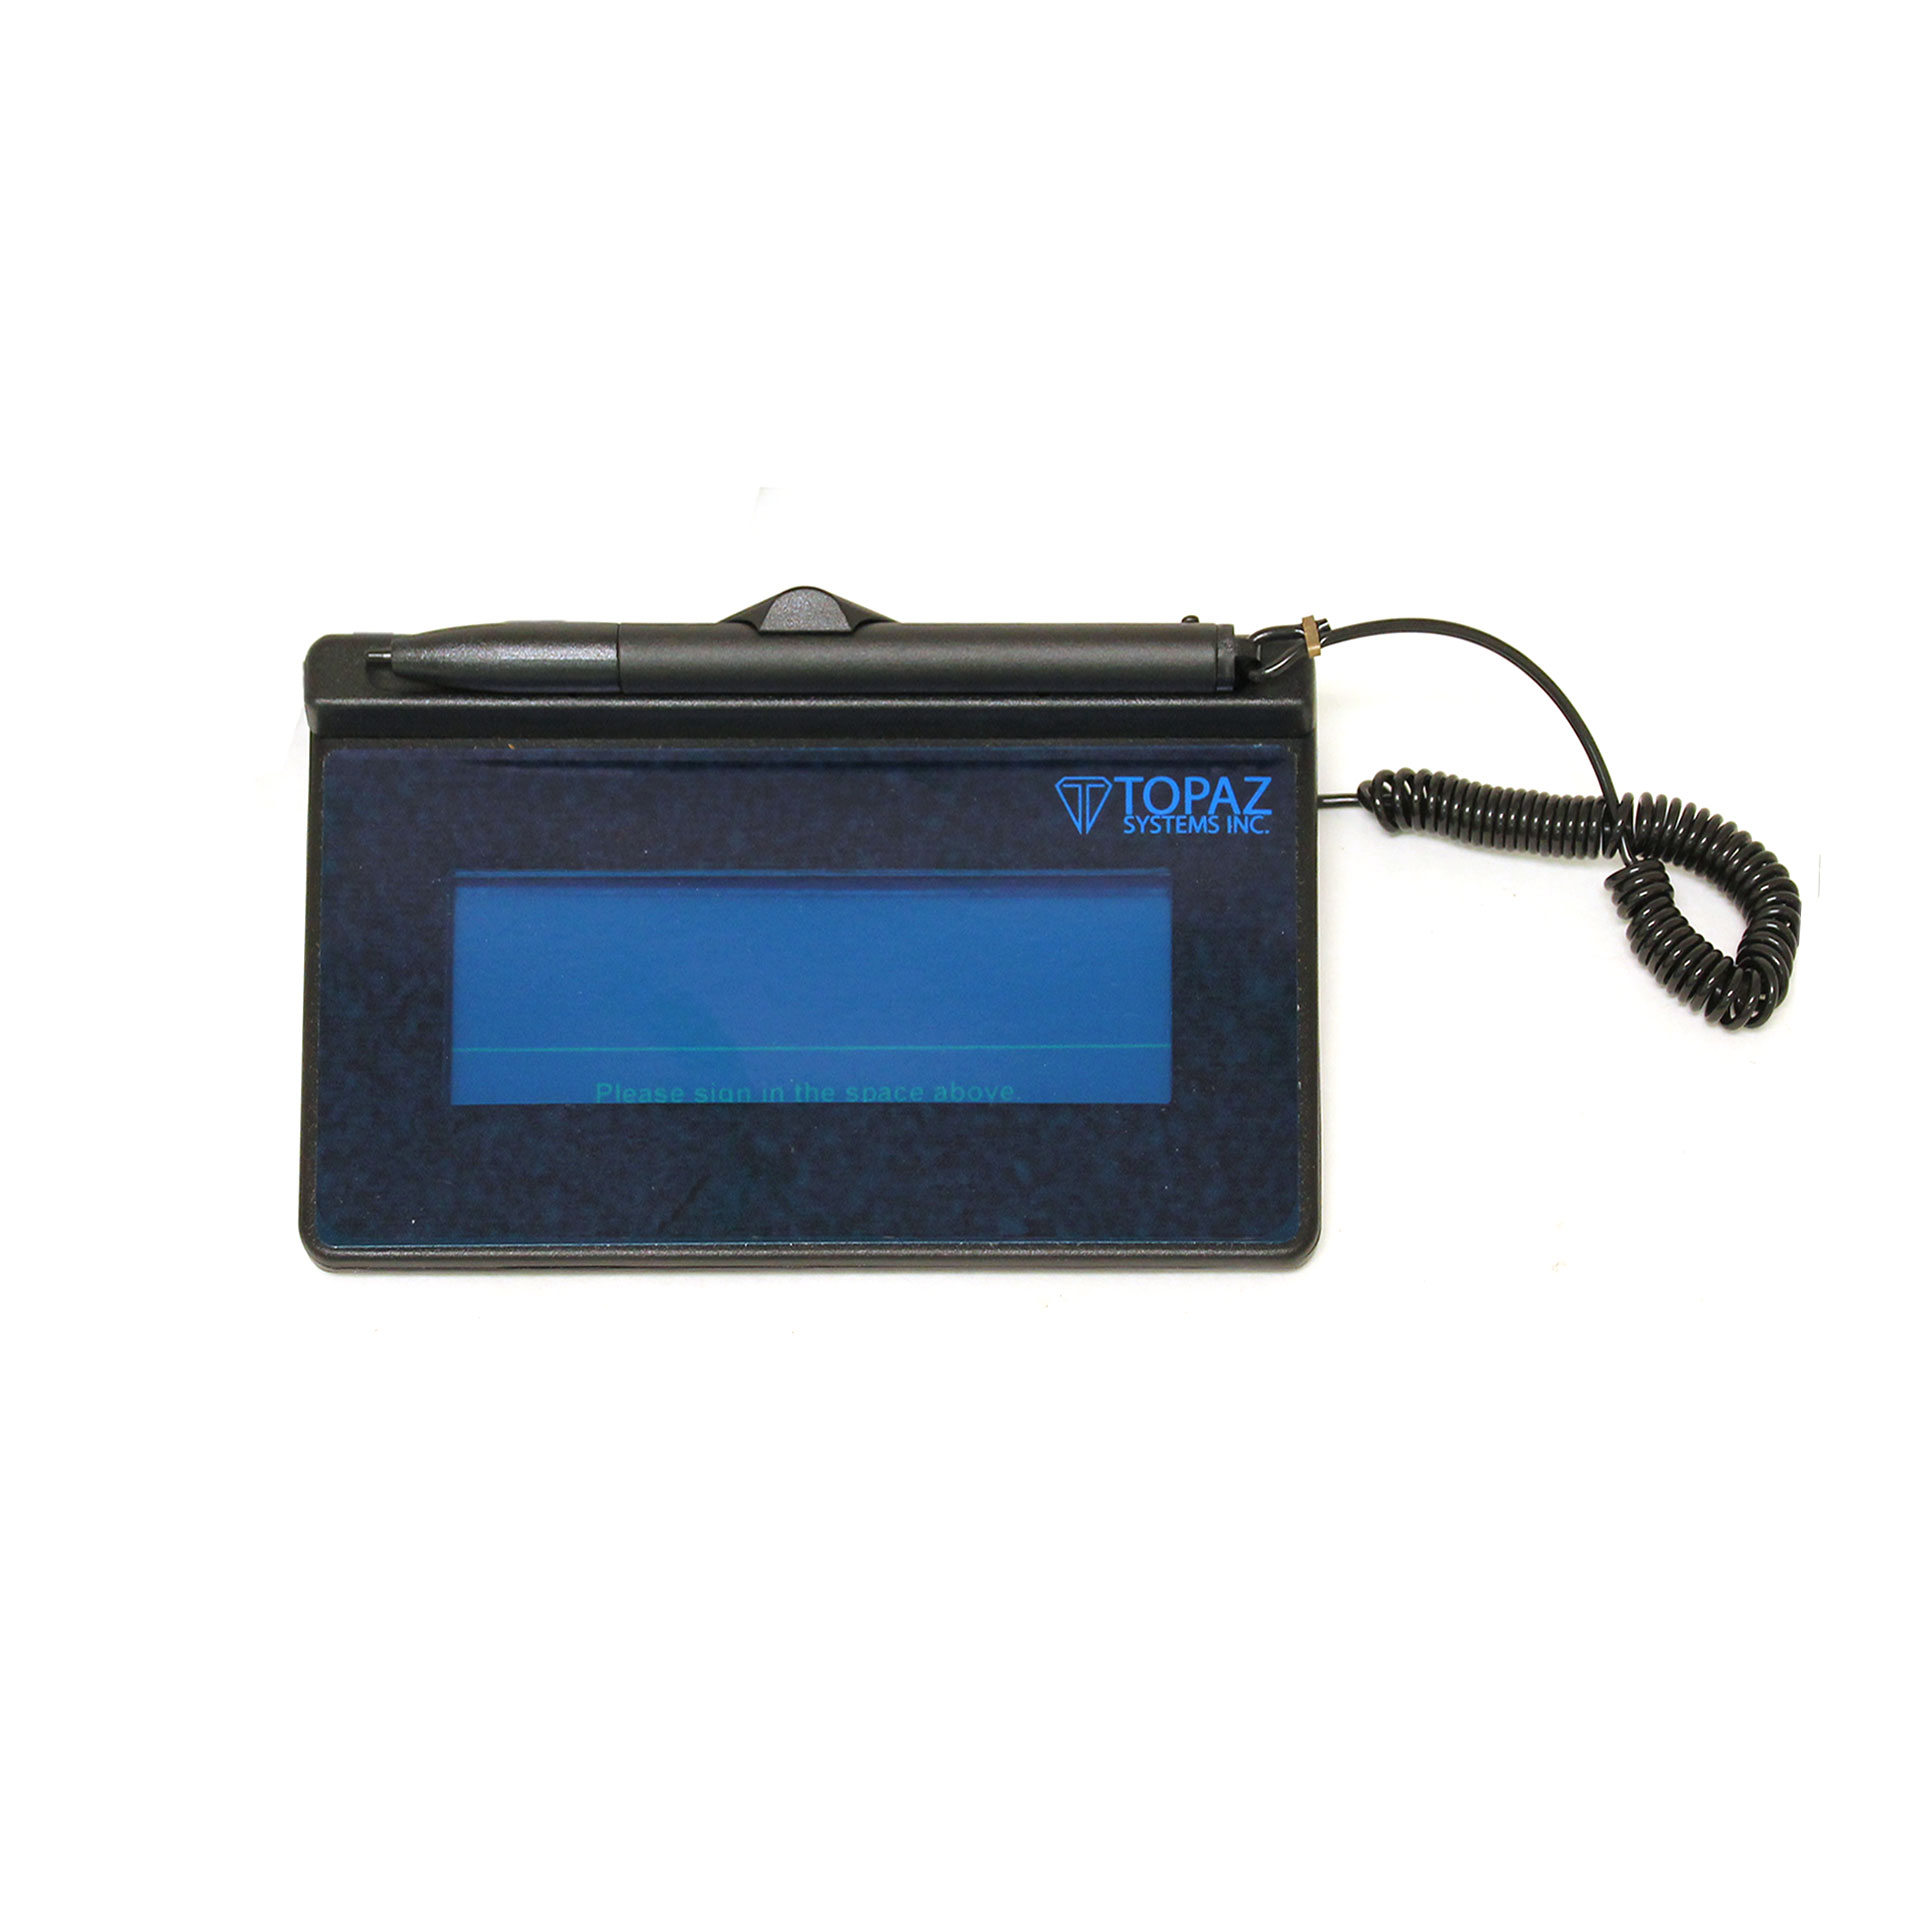 Topaz SigLite T-S460-HSB-R Wired Electronic Signature Pad - Click Image to Close